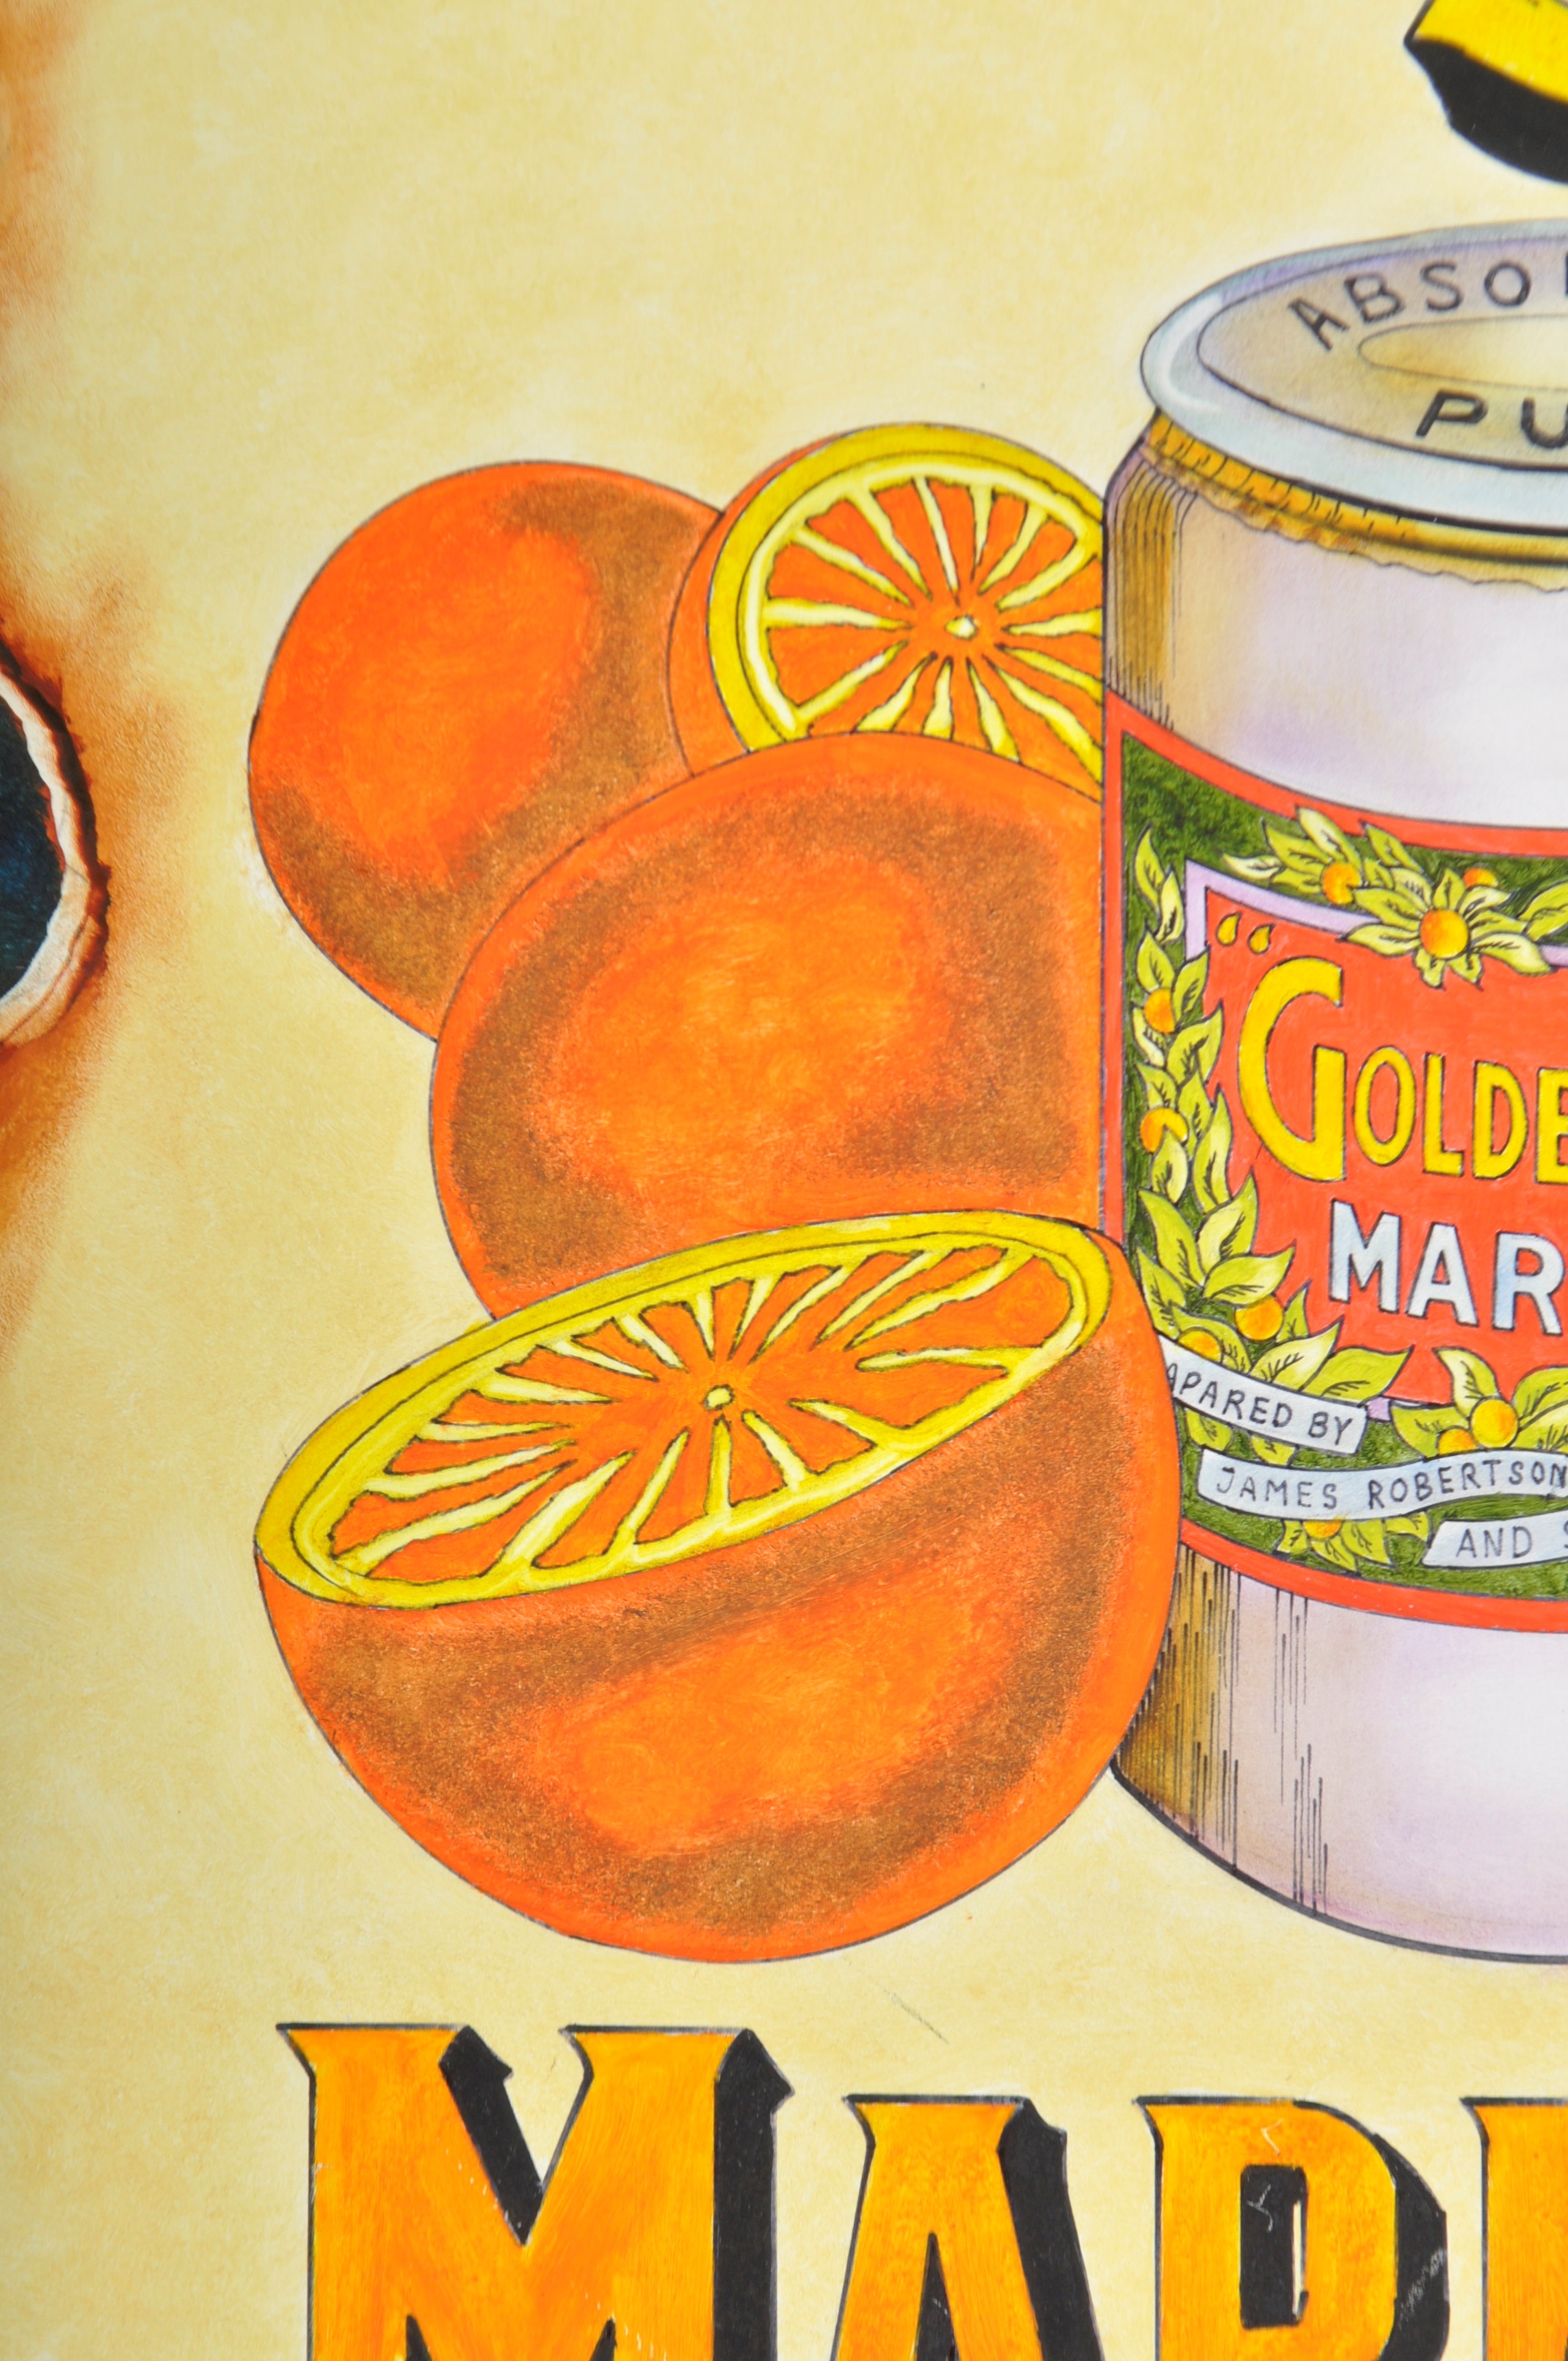 GOLDEN SHRED MARMALADE - LARGE OIL ON BOARD ADVERTISING SIGN - Image 4 of 7